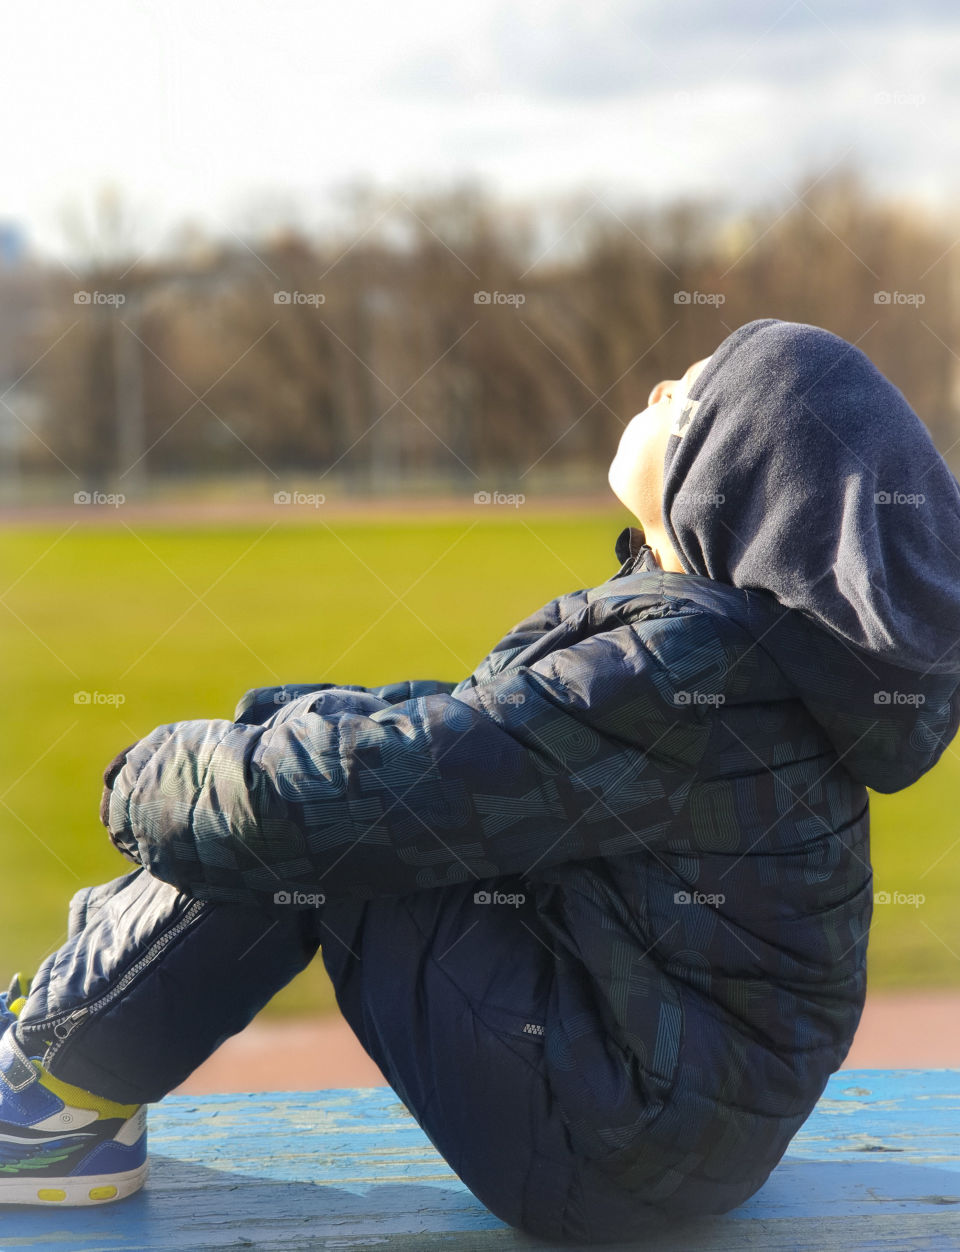 Spring sunny day, a boy sitting in a stadium in the park enjoys the spring warmth, set his face to the sun's rays